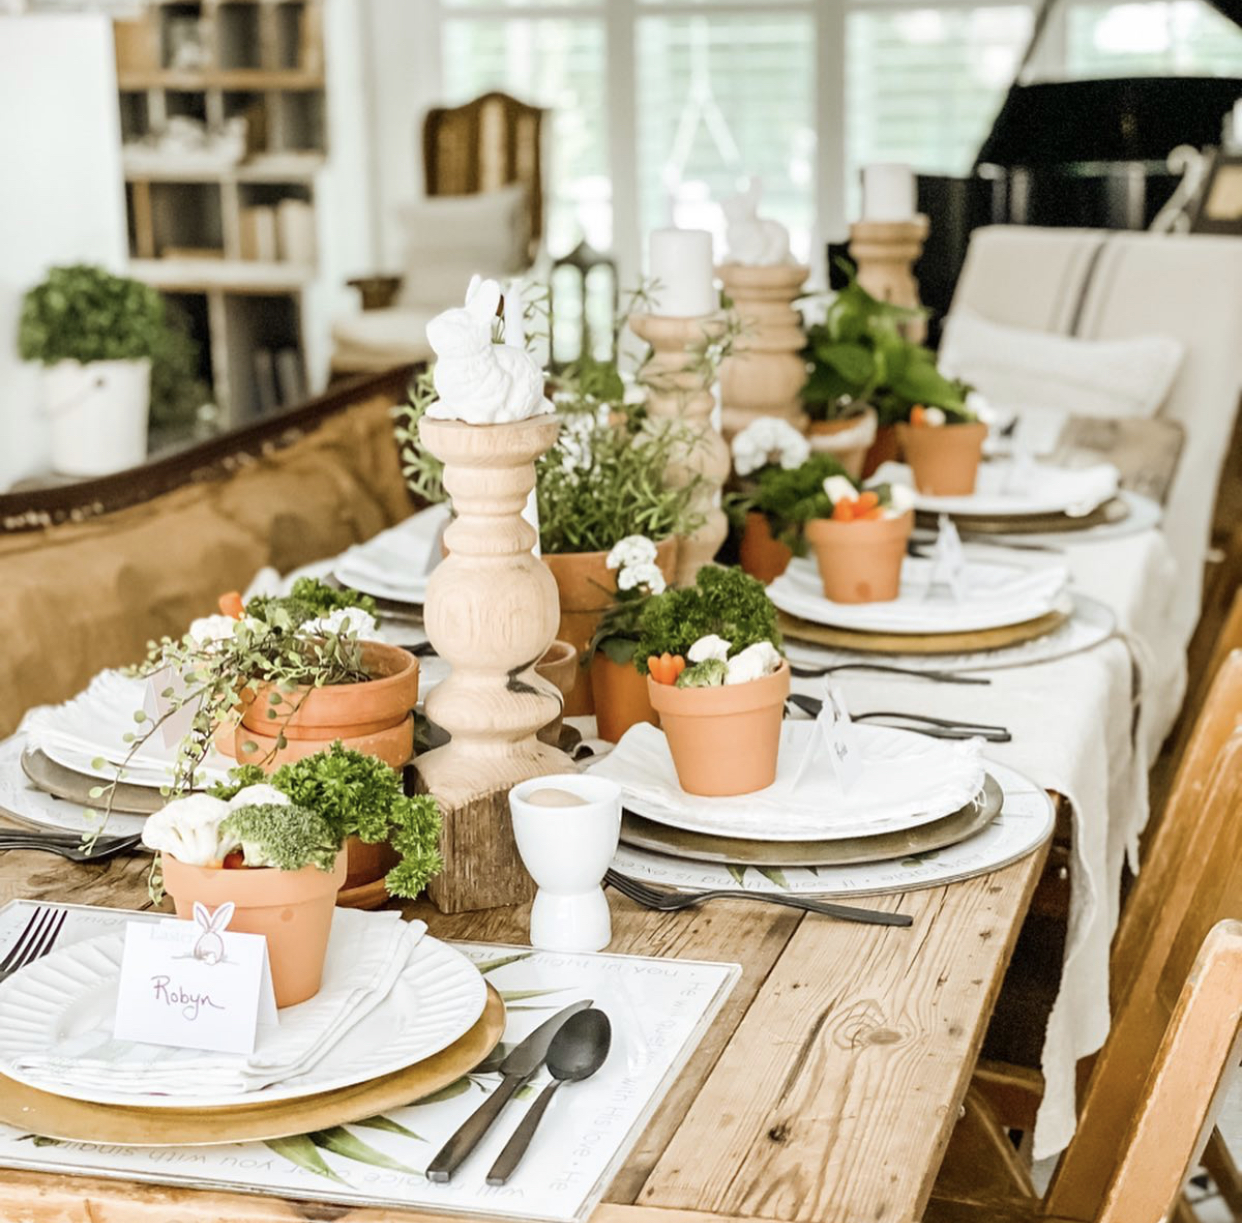 beautiful spring tablescape with greenery down the middle in terracotta pots and a small terracotta pot on each plate with veggies inside